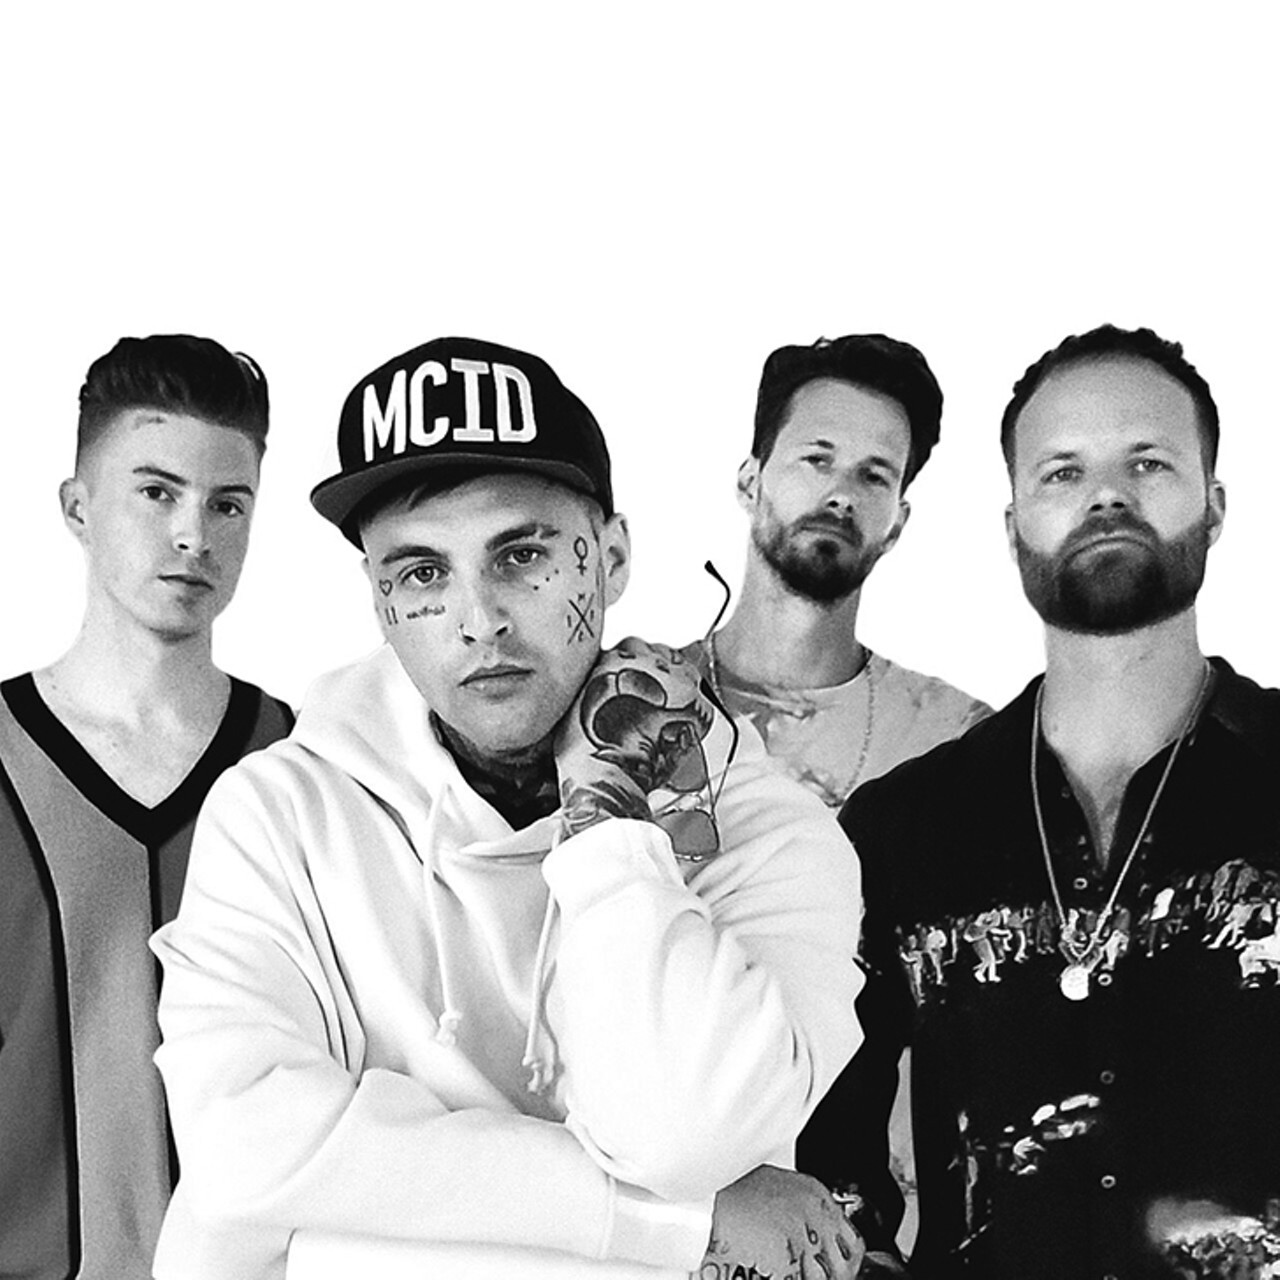 THURSDAY 13
MUSIC: Highly Suspect
Popular AltRockers Highly Suspect play Madison Live. 8 p.m. Thursday, Feb. 13. $38 advance; $40 doors. Madison Theater, 730 Madison Ave., Covington. madisontheater.com.
Photo: Provided by 300 Entertainment